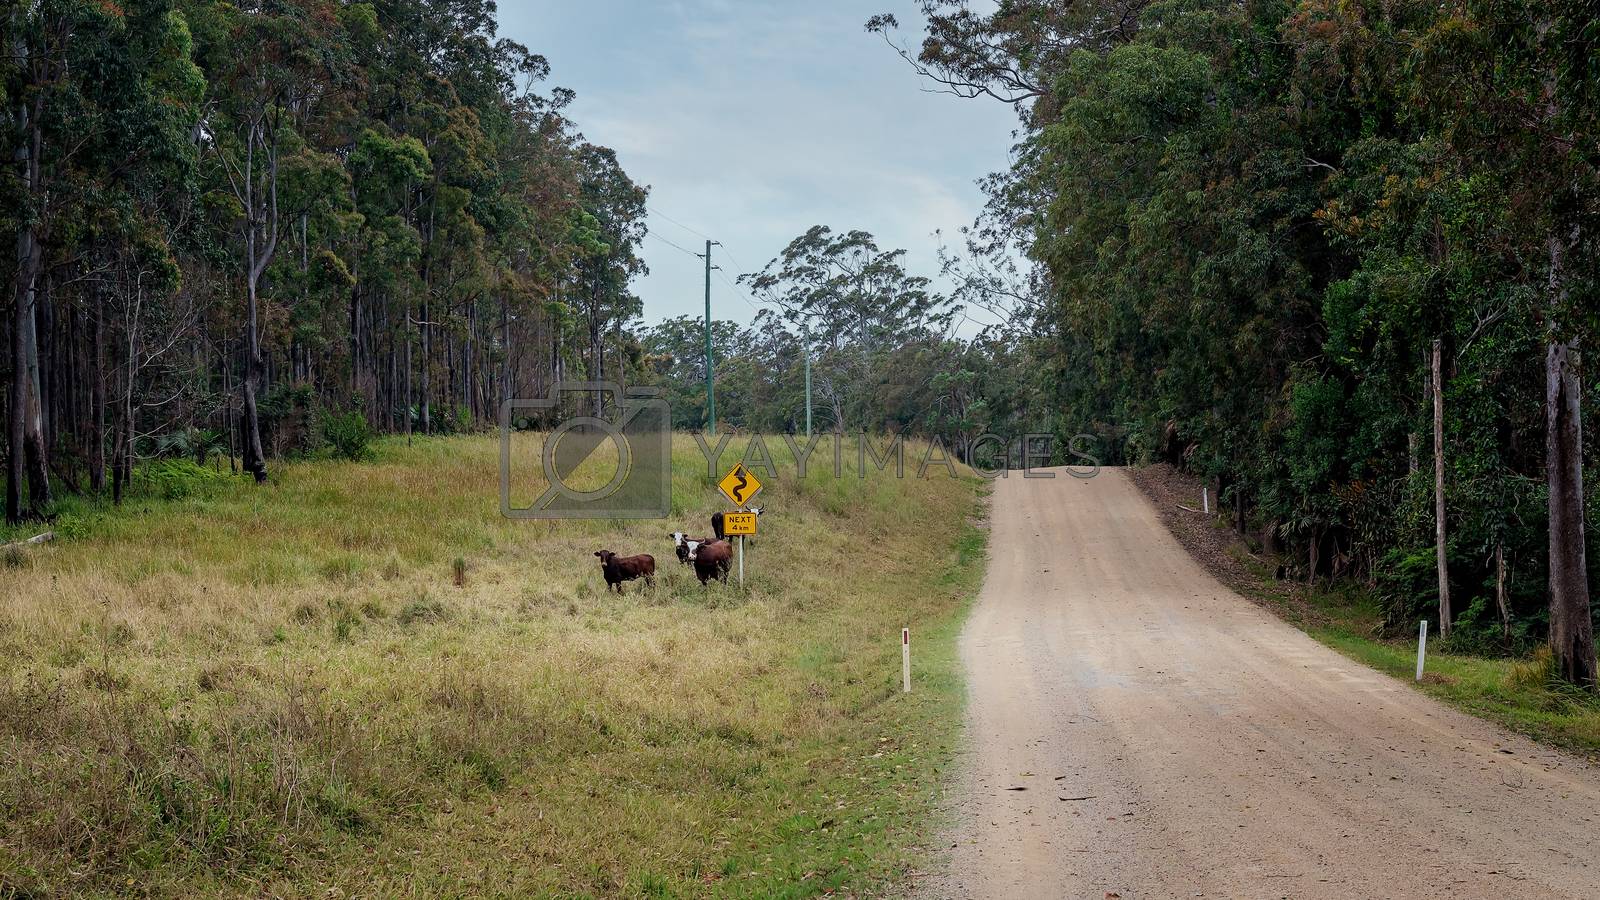 Royalty free image of Escaped Cattle Beside A Rural Road Sign In The Mountains by 	JacksonStock